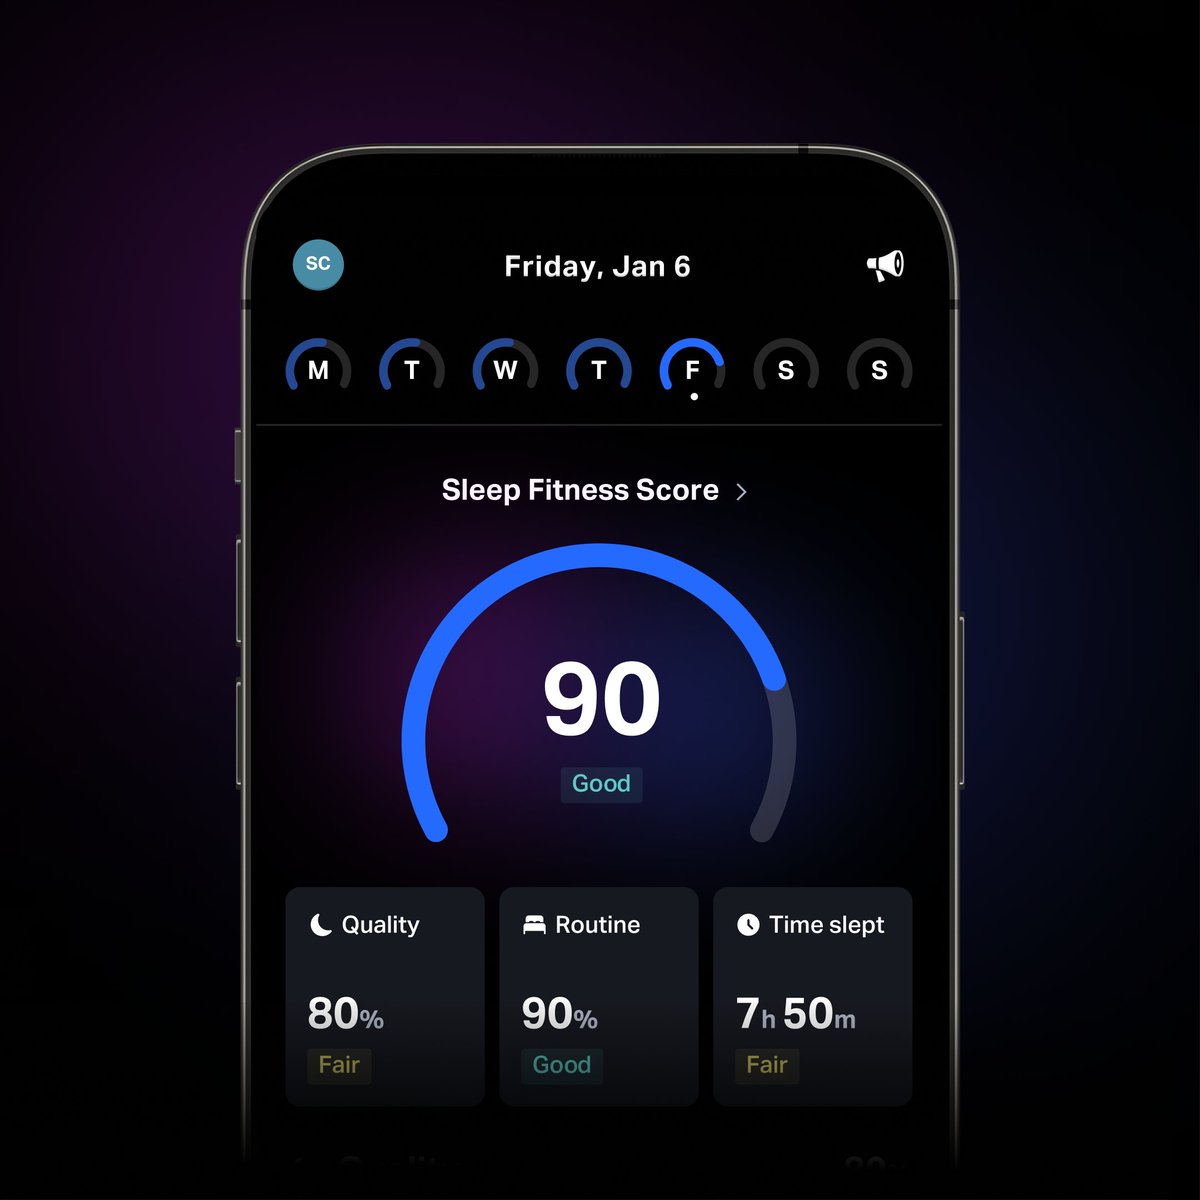 NEW IN THE APP A deeper look at your sleep and health metrics 👀 View your sleep and health data in one place based on ☑️ Sleep quality ☑️ Time slept ☑️ Routine consistency Tweet us your Sleep Fitness score tomorrow morning 😎